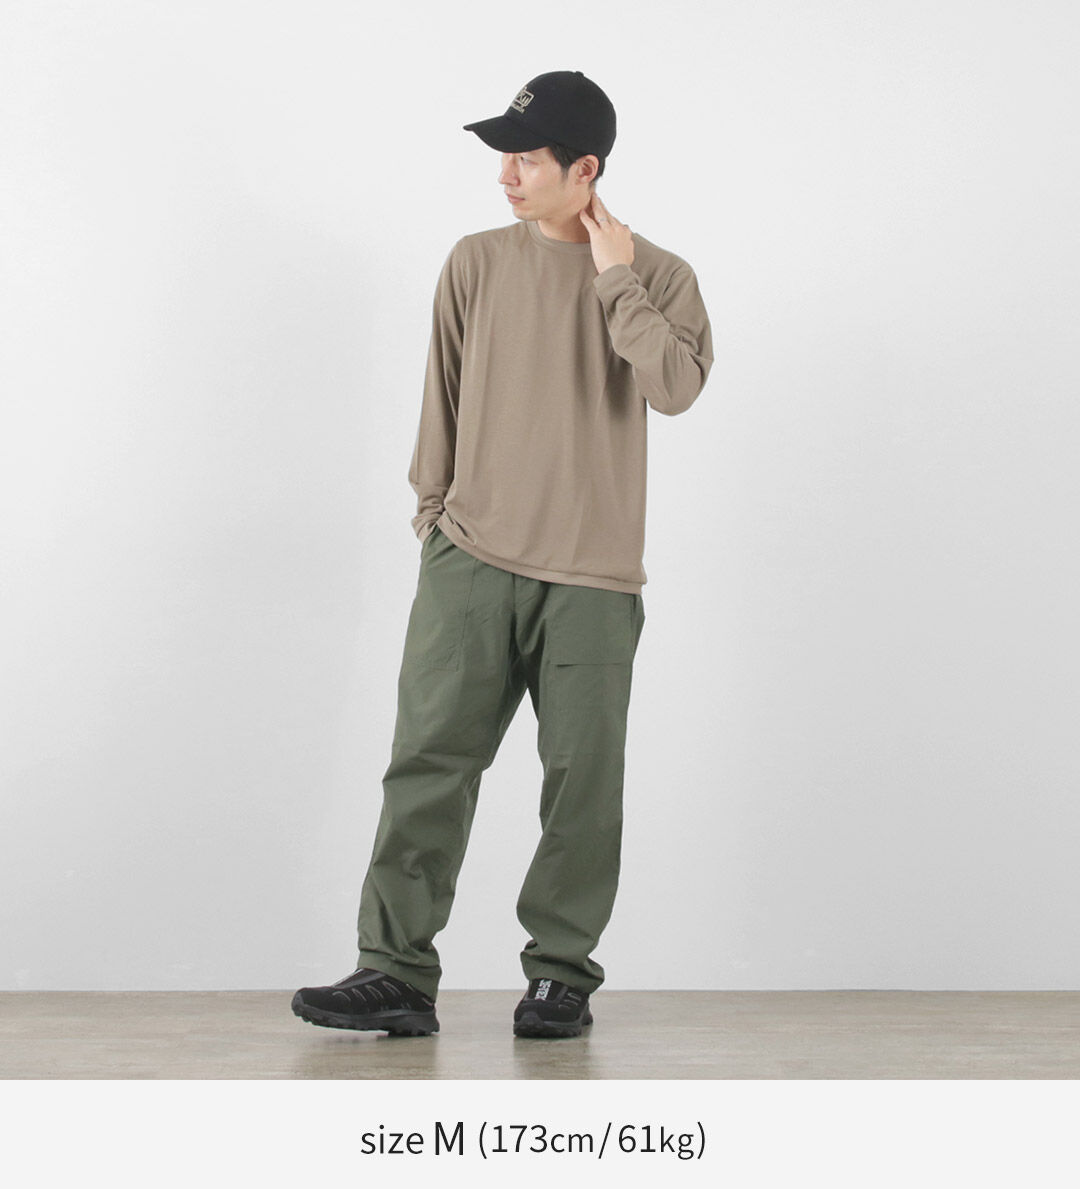 WOOLRICH Recycled Nylon Lunch Pants